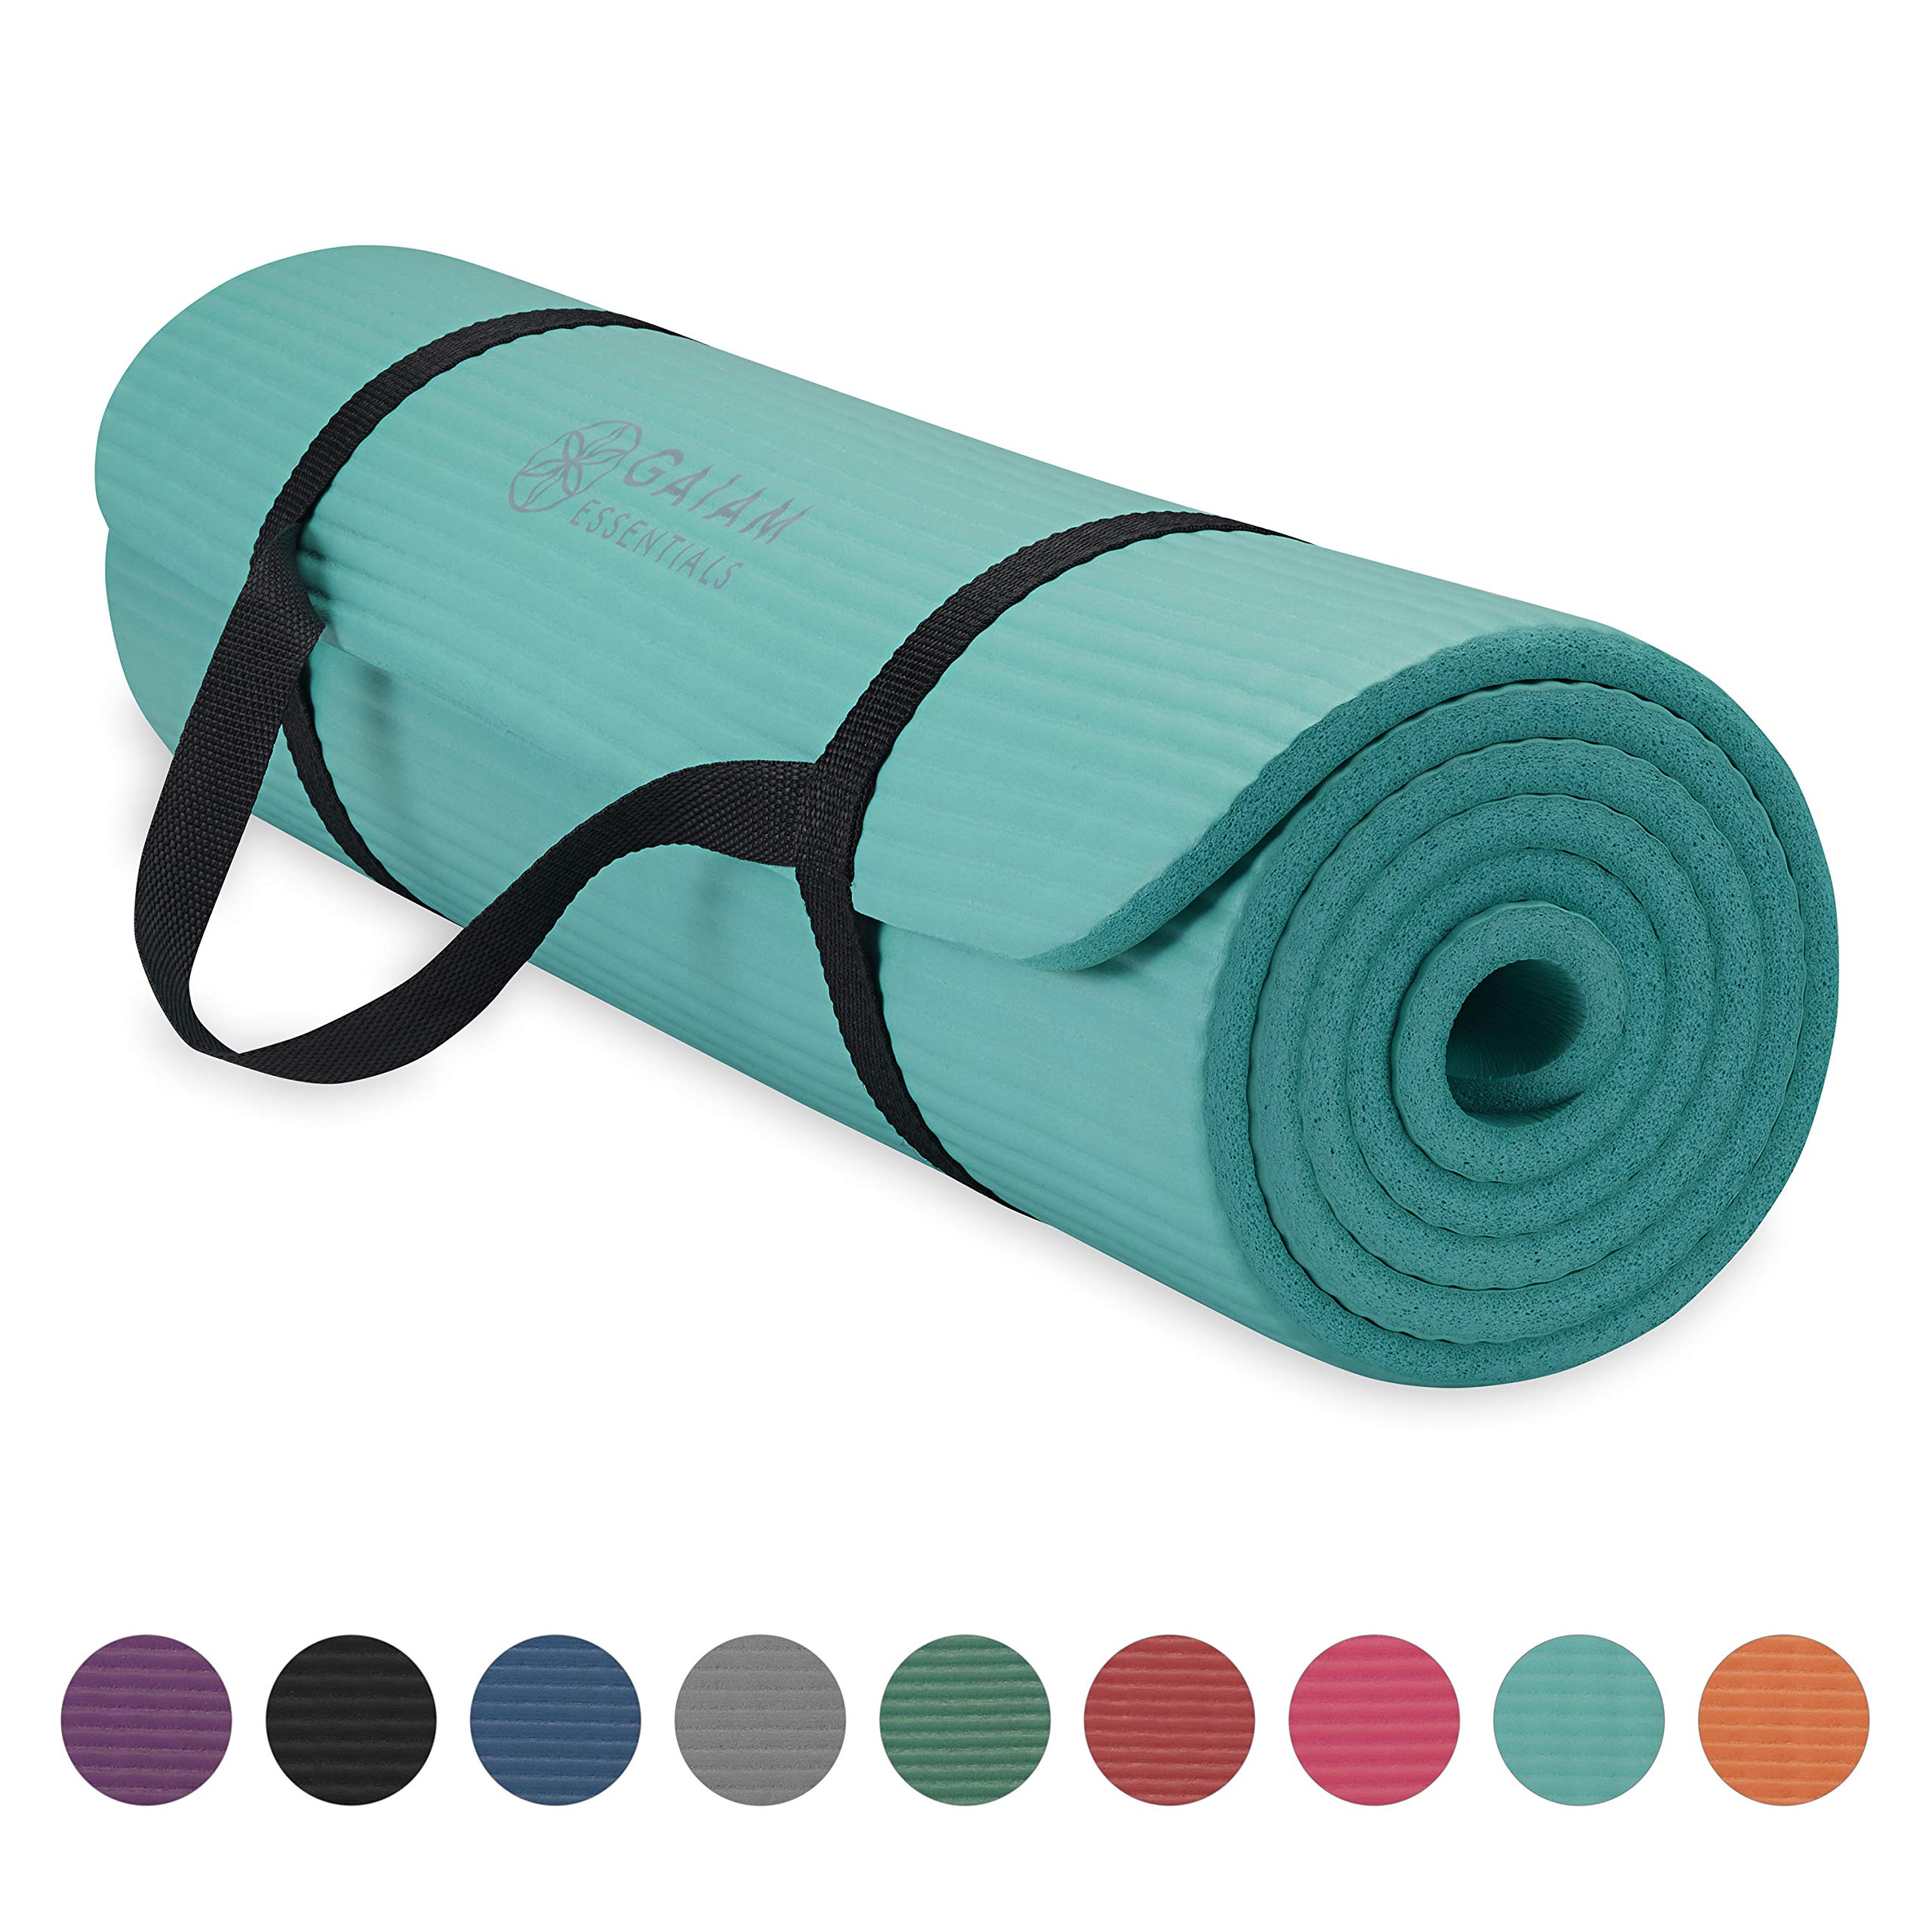 Gaiam + Thick Yoga Mat Fitness & Exercise Mat with EasyCinch Yoga Mat Carrier Strap